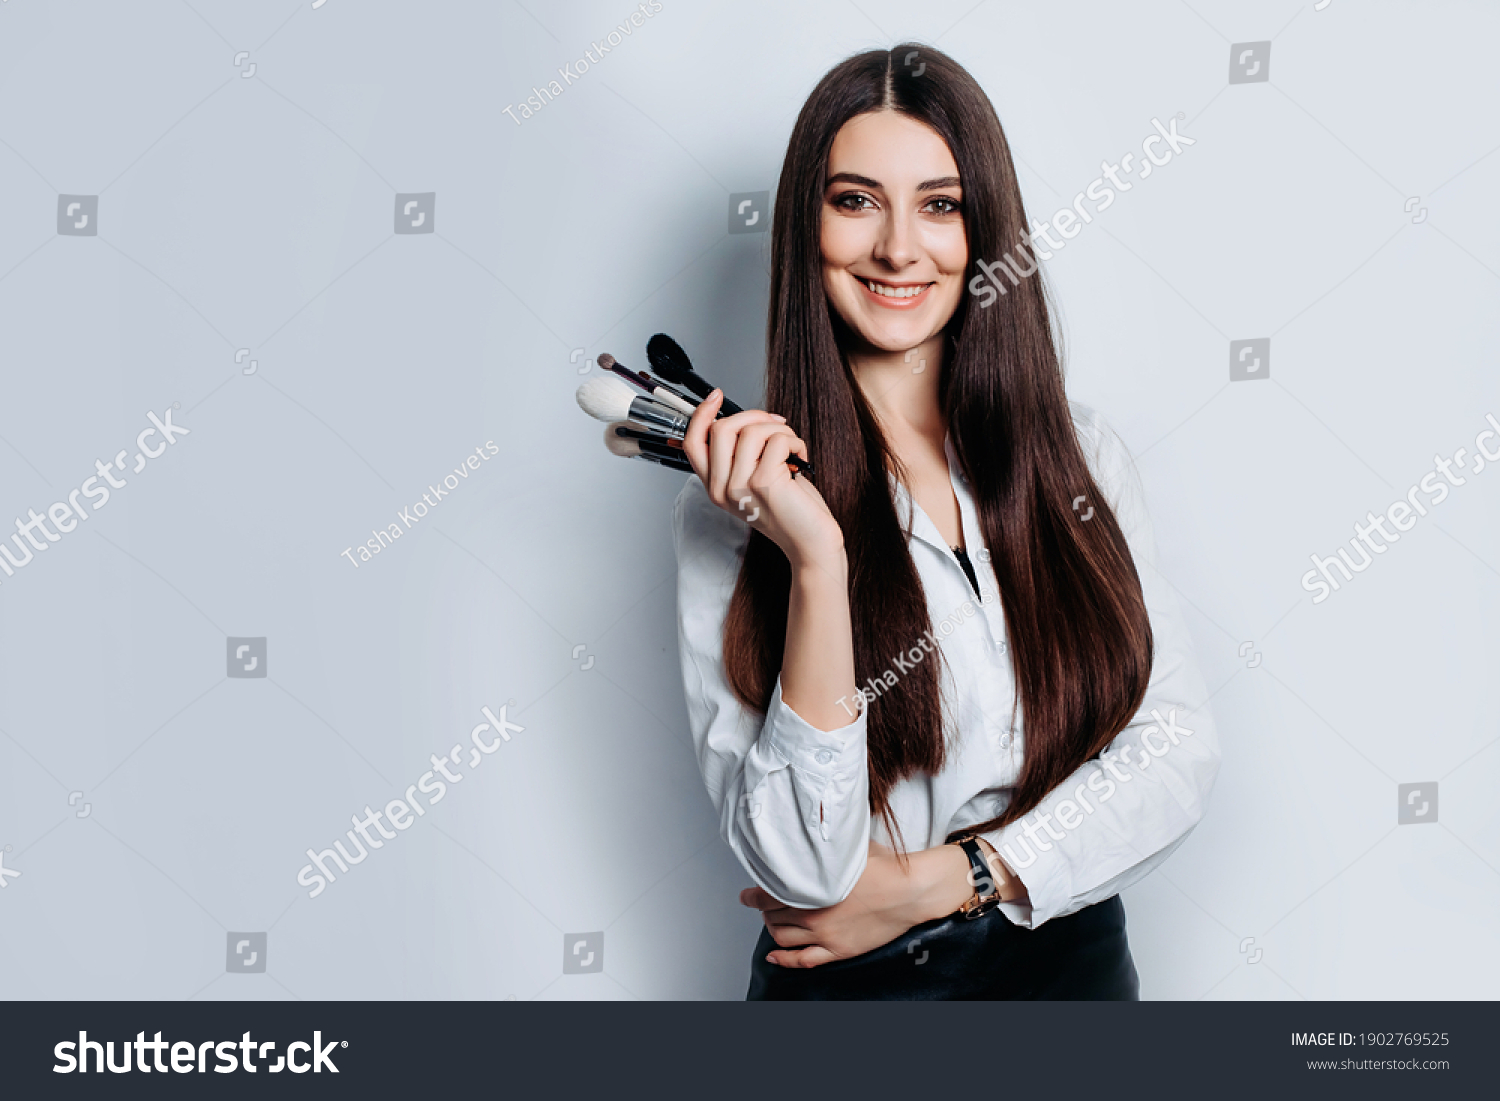 Makeup artist with brushes in hand on a white background #1902769525